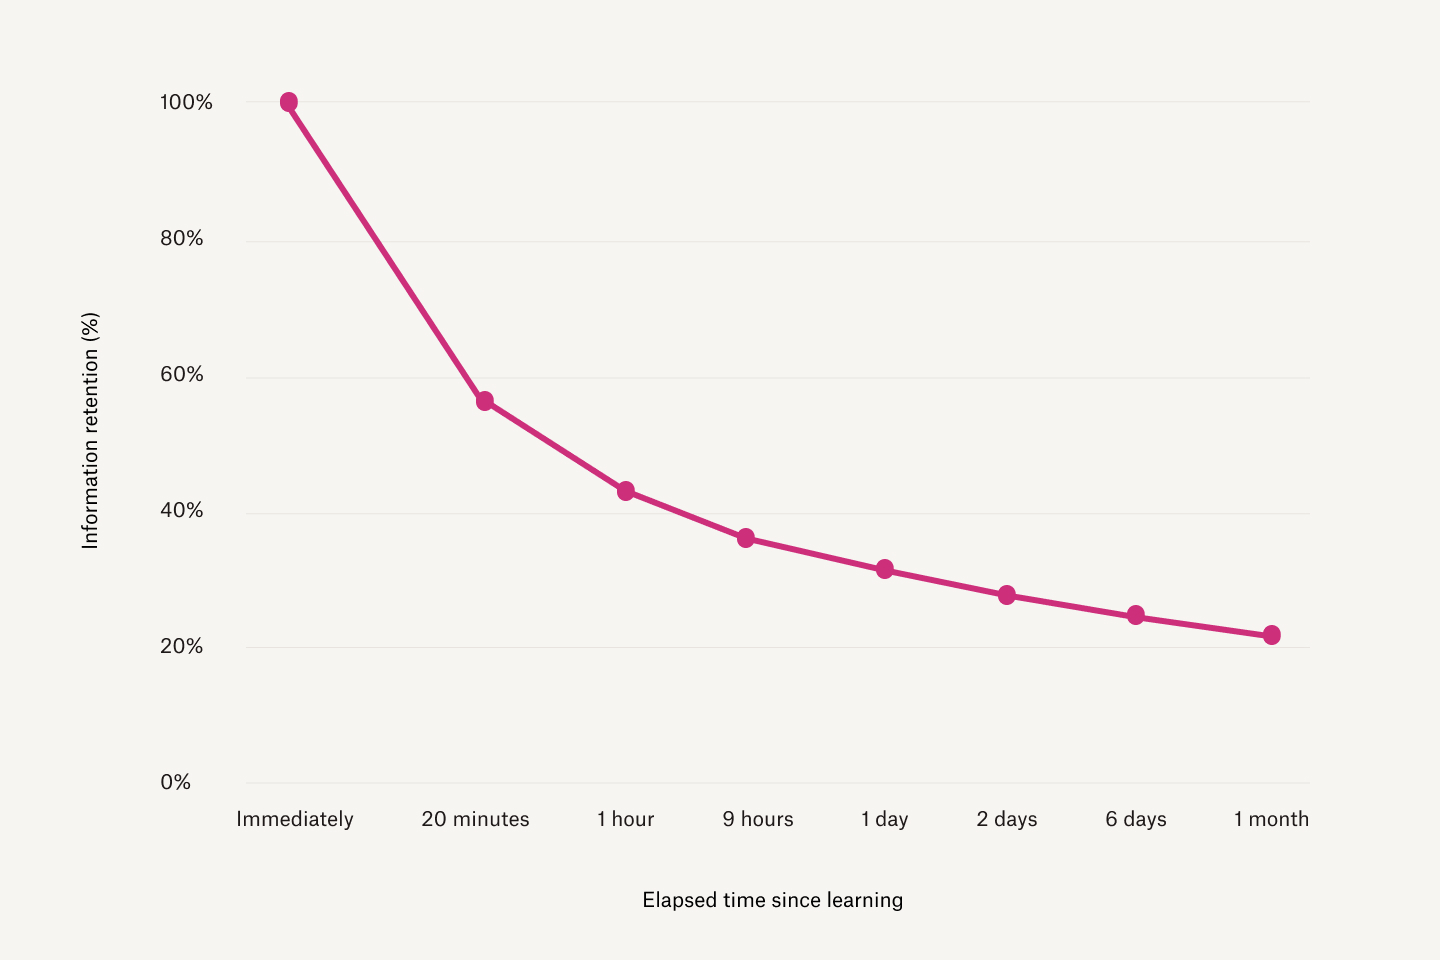 Graph that shows that the longer the elapsed time since learning something, the less information is retained